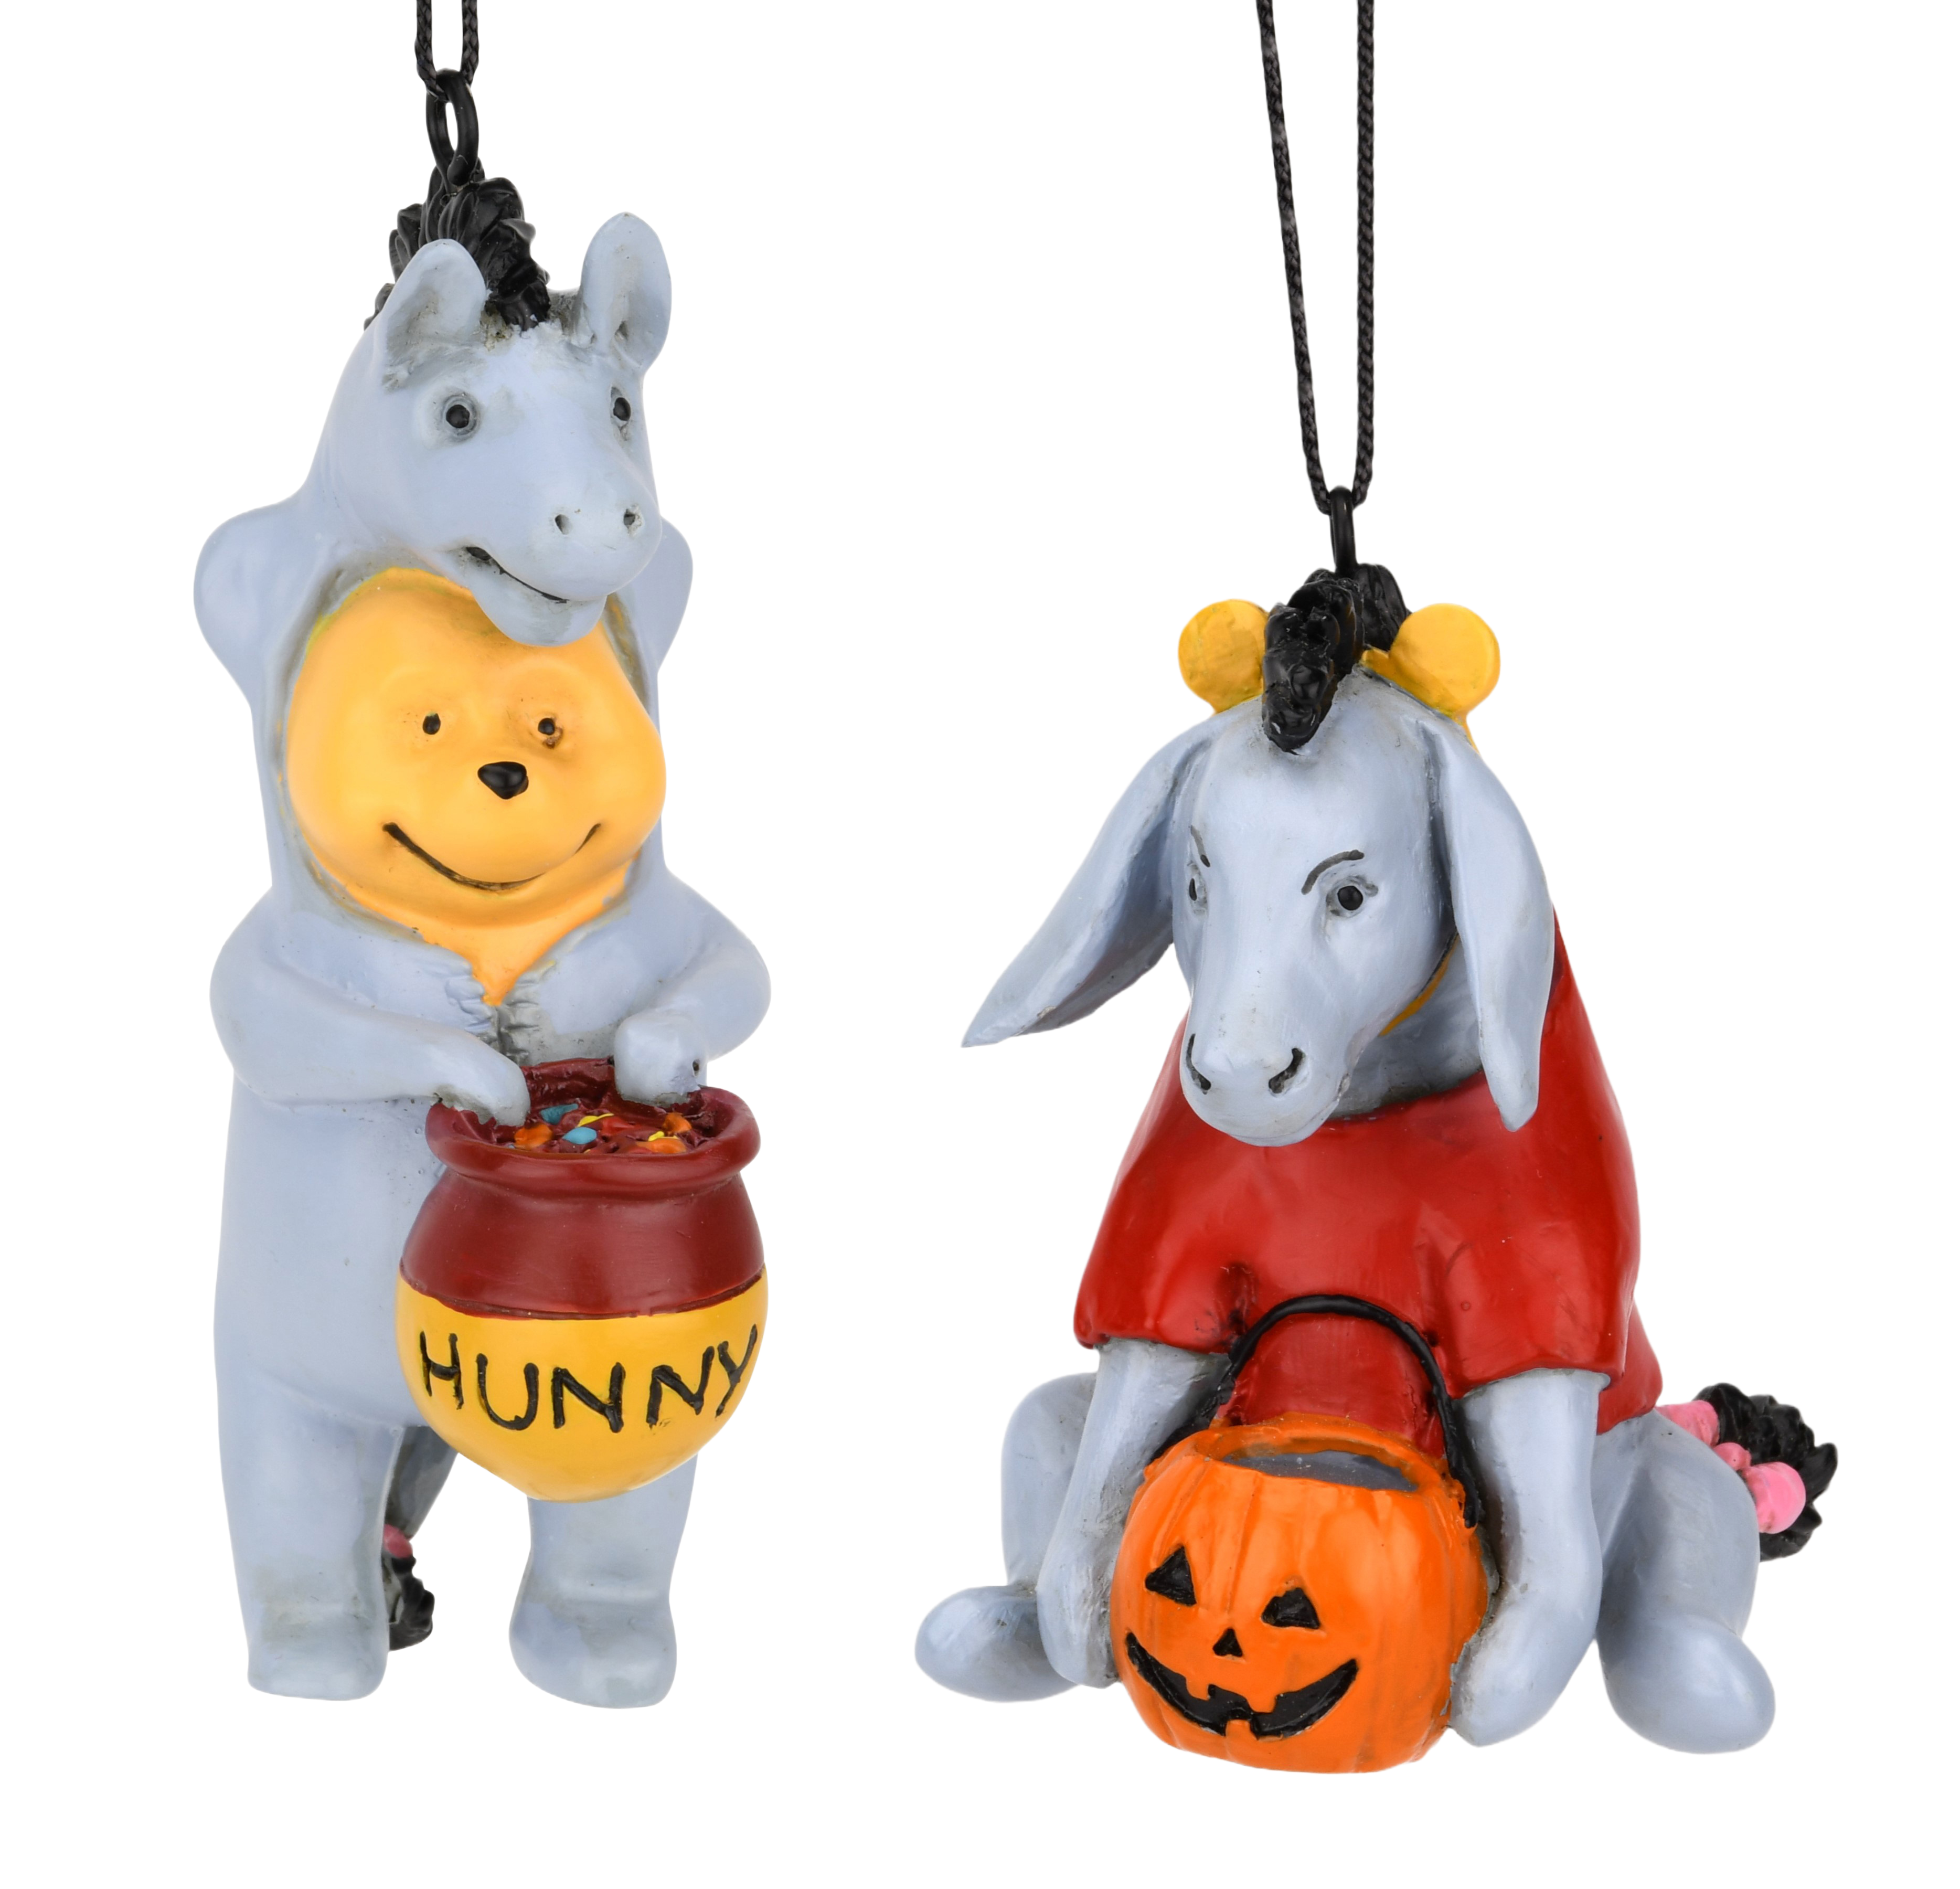 Winnie The Pooh and Eeyore Dressed up as Each Other for Trick or Treating Cute Halloween Ornaments